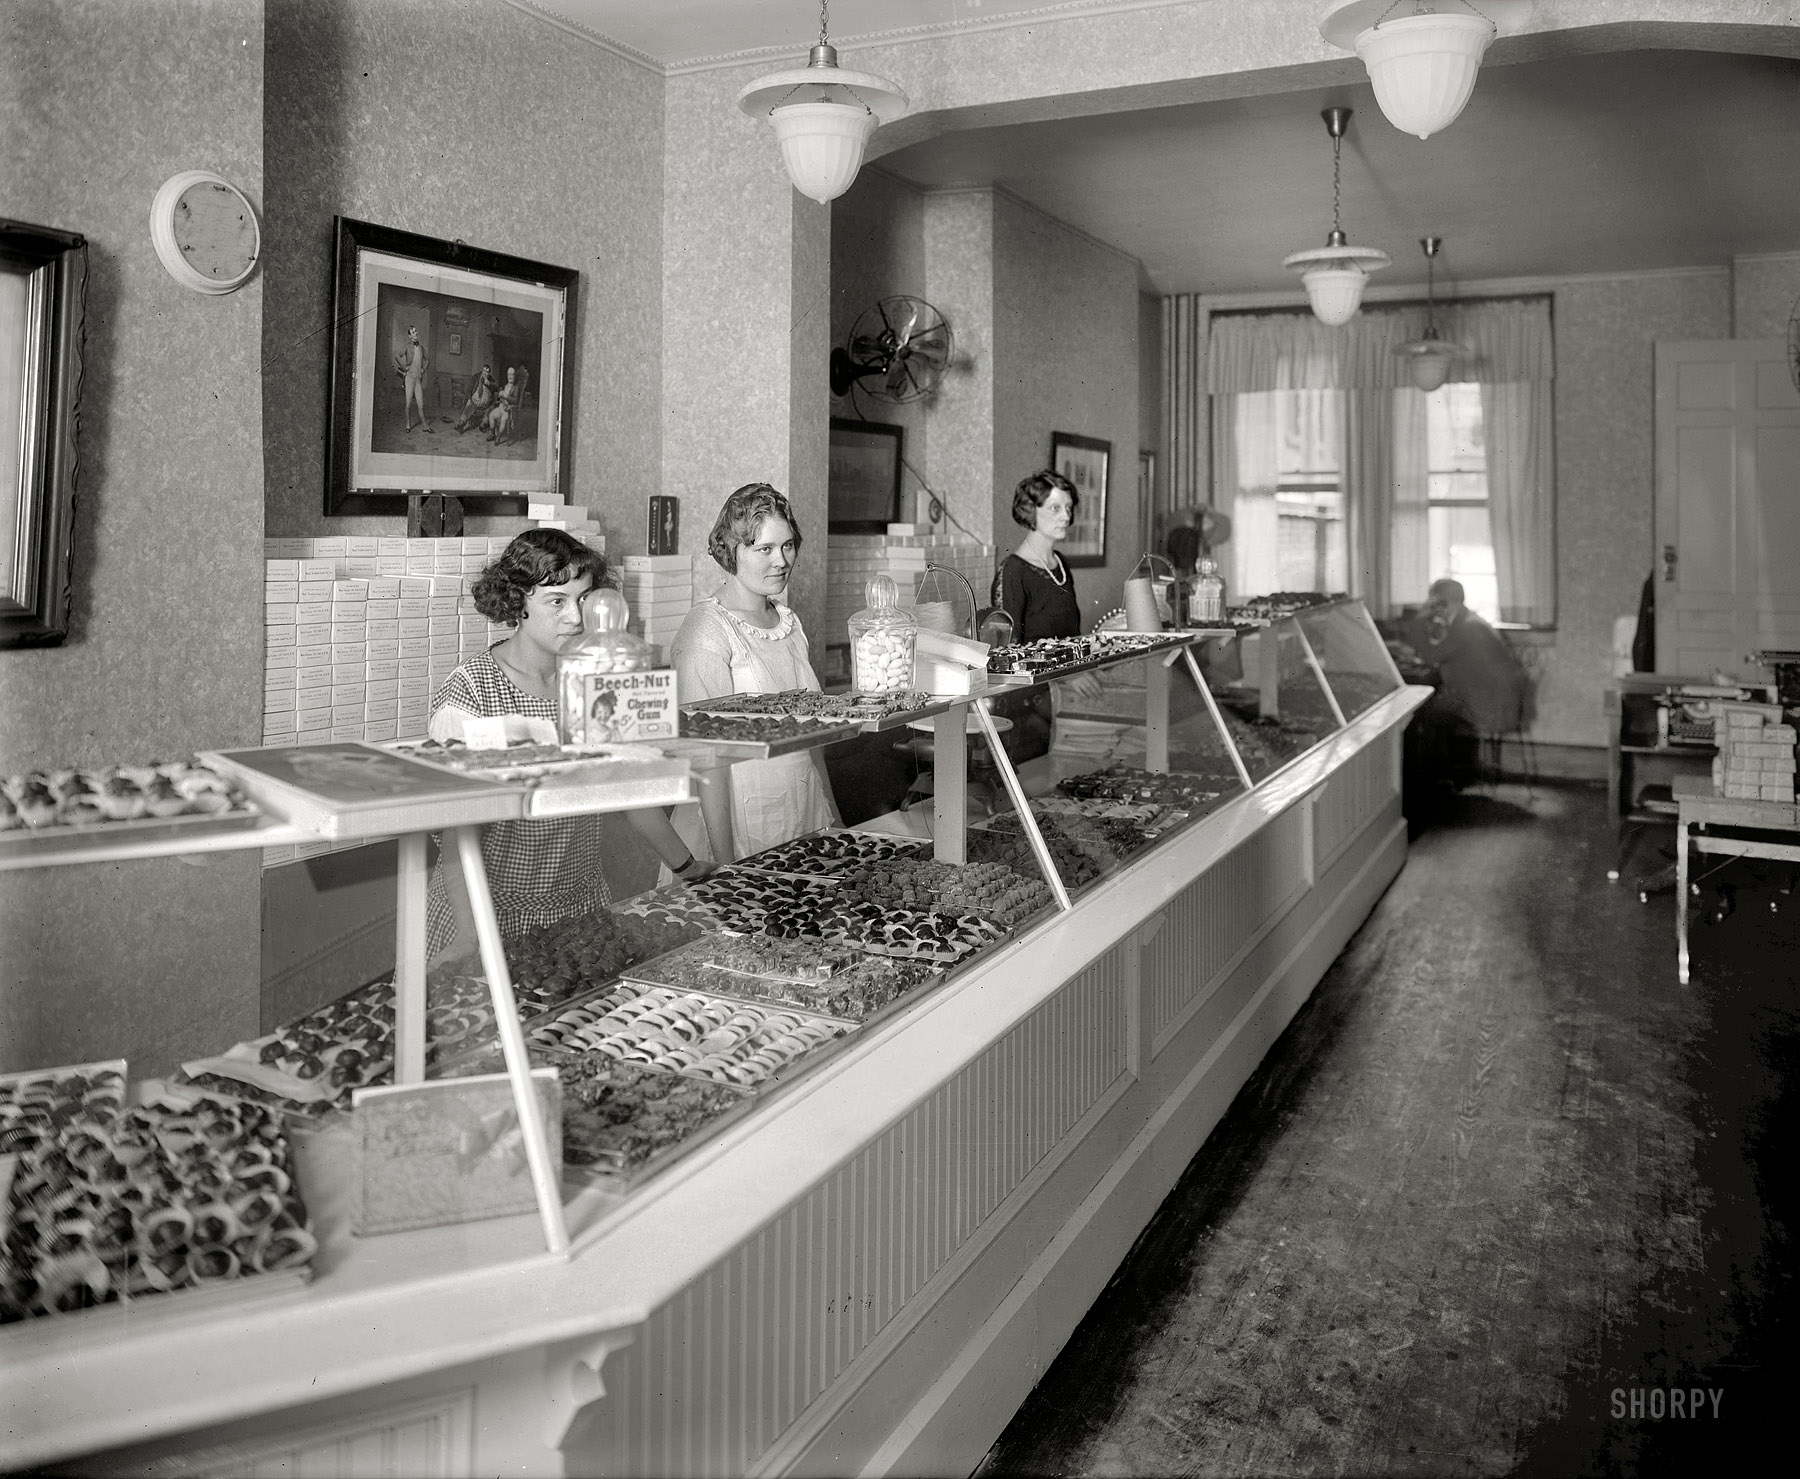 Washington, D.C., circa 1922. "Benj. Franklin candy store, 13th Street N.W., interior." National Photo Company Collection glass negative. View full size.